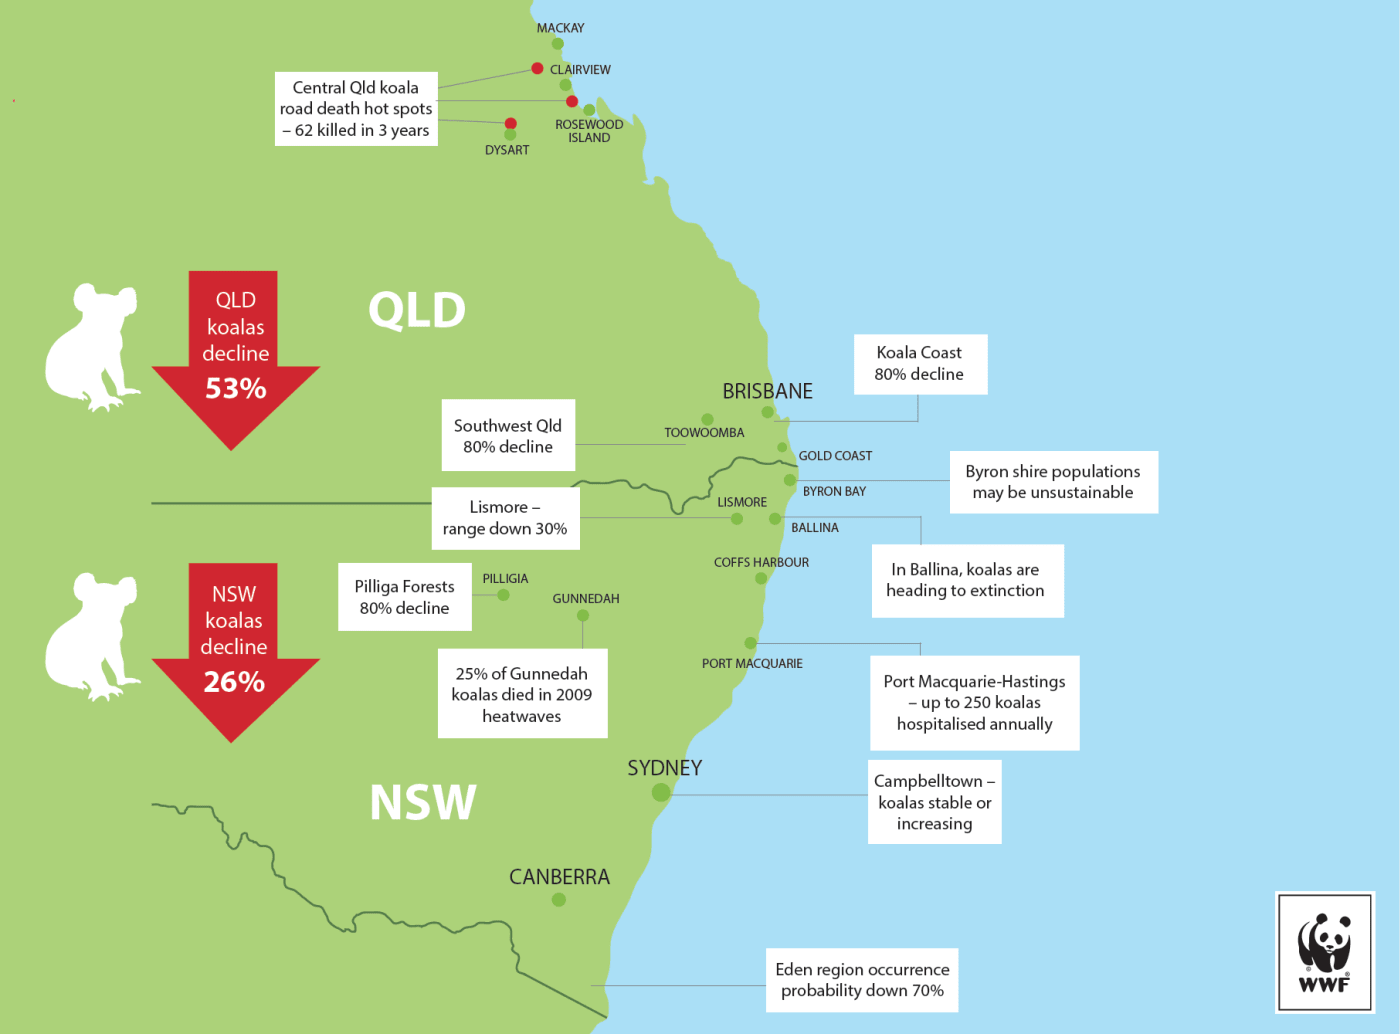 Map showing the decline of koala populations in NSW and South-East Queensland